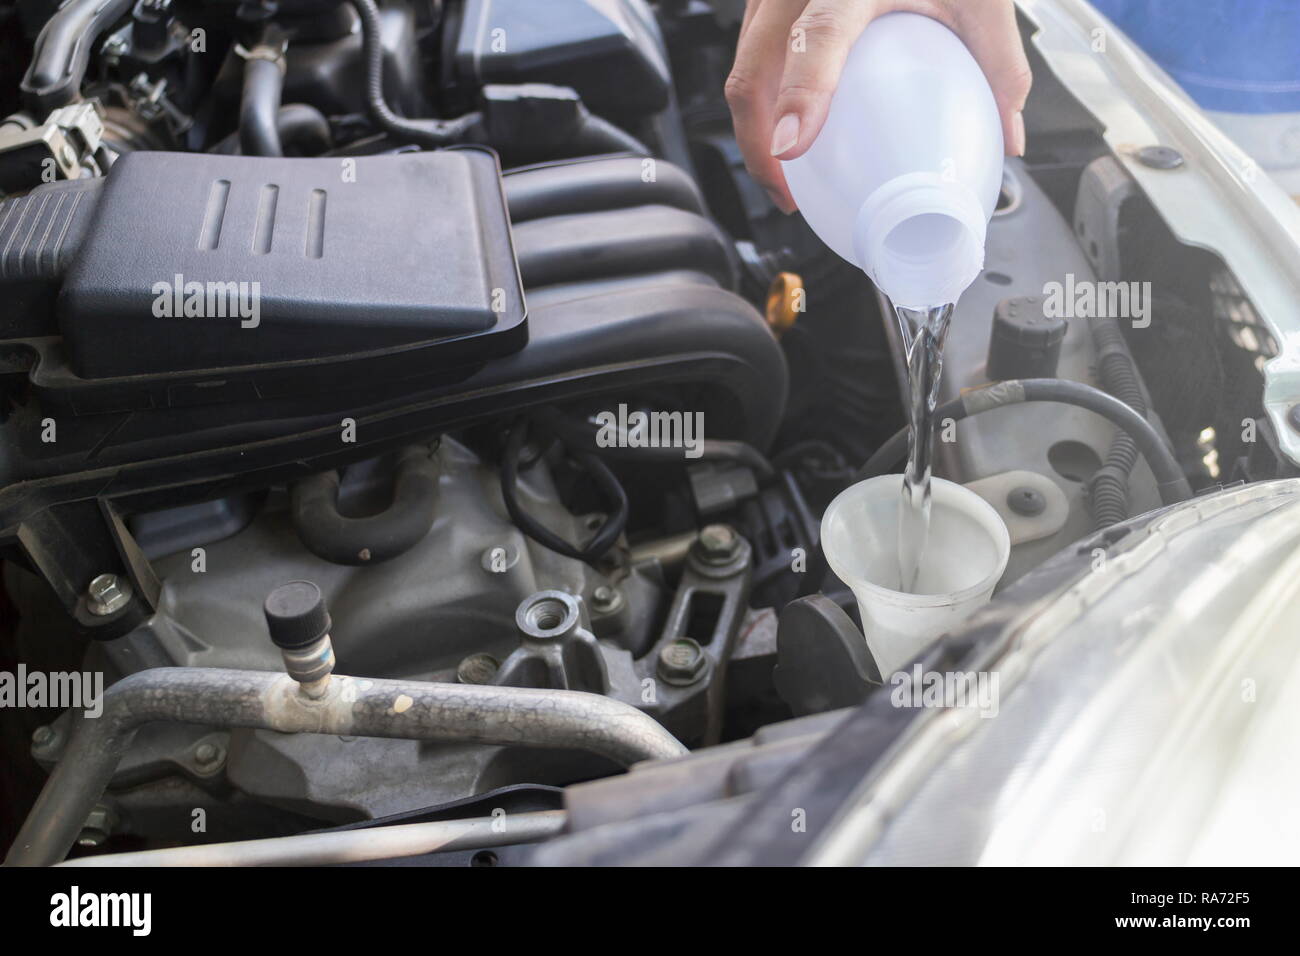 Mechanic filling water for windshield washer fluid to a car in the garage. Stock Photo